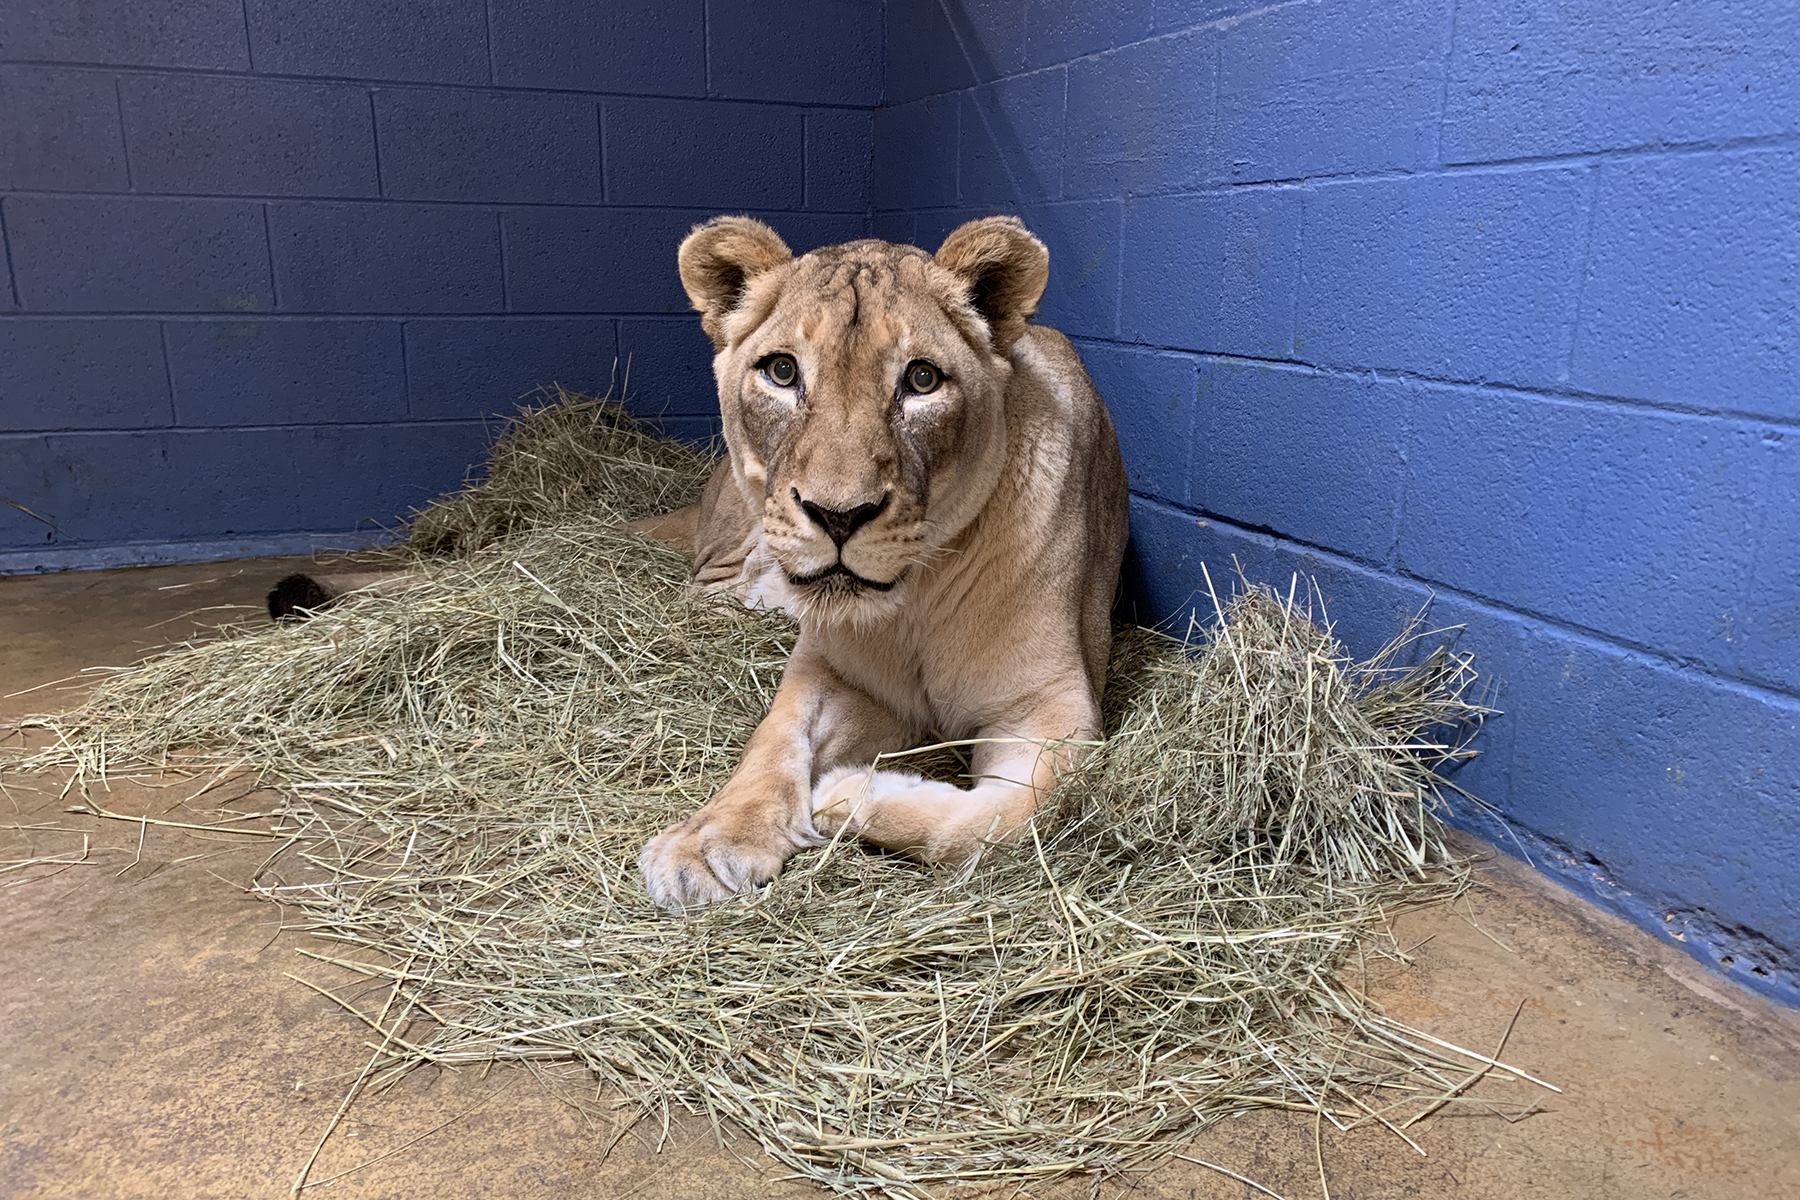 African lion Shera rests on a pile of hay in her indoor enclosure at the Great Cats exhibit.